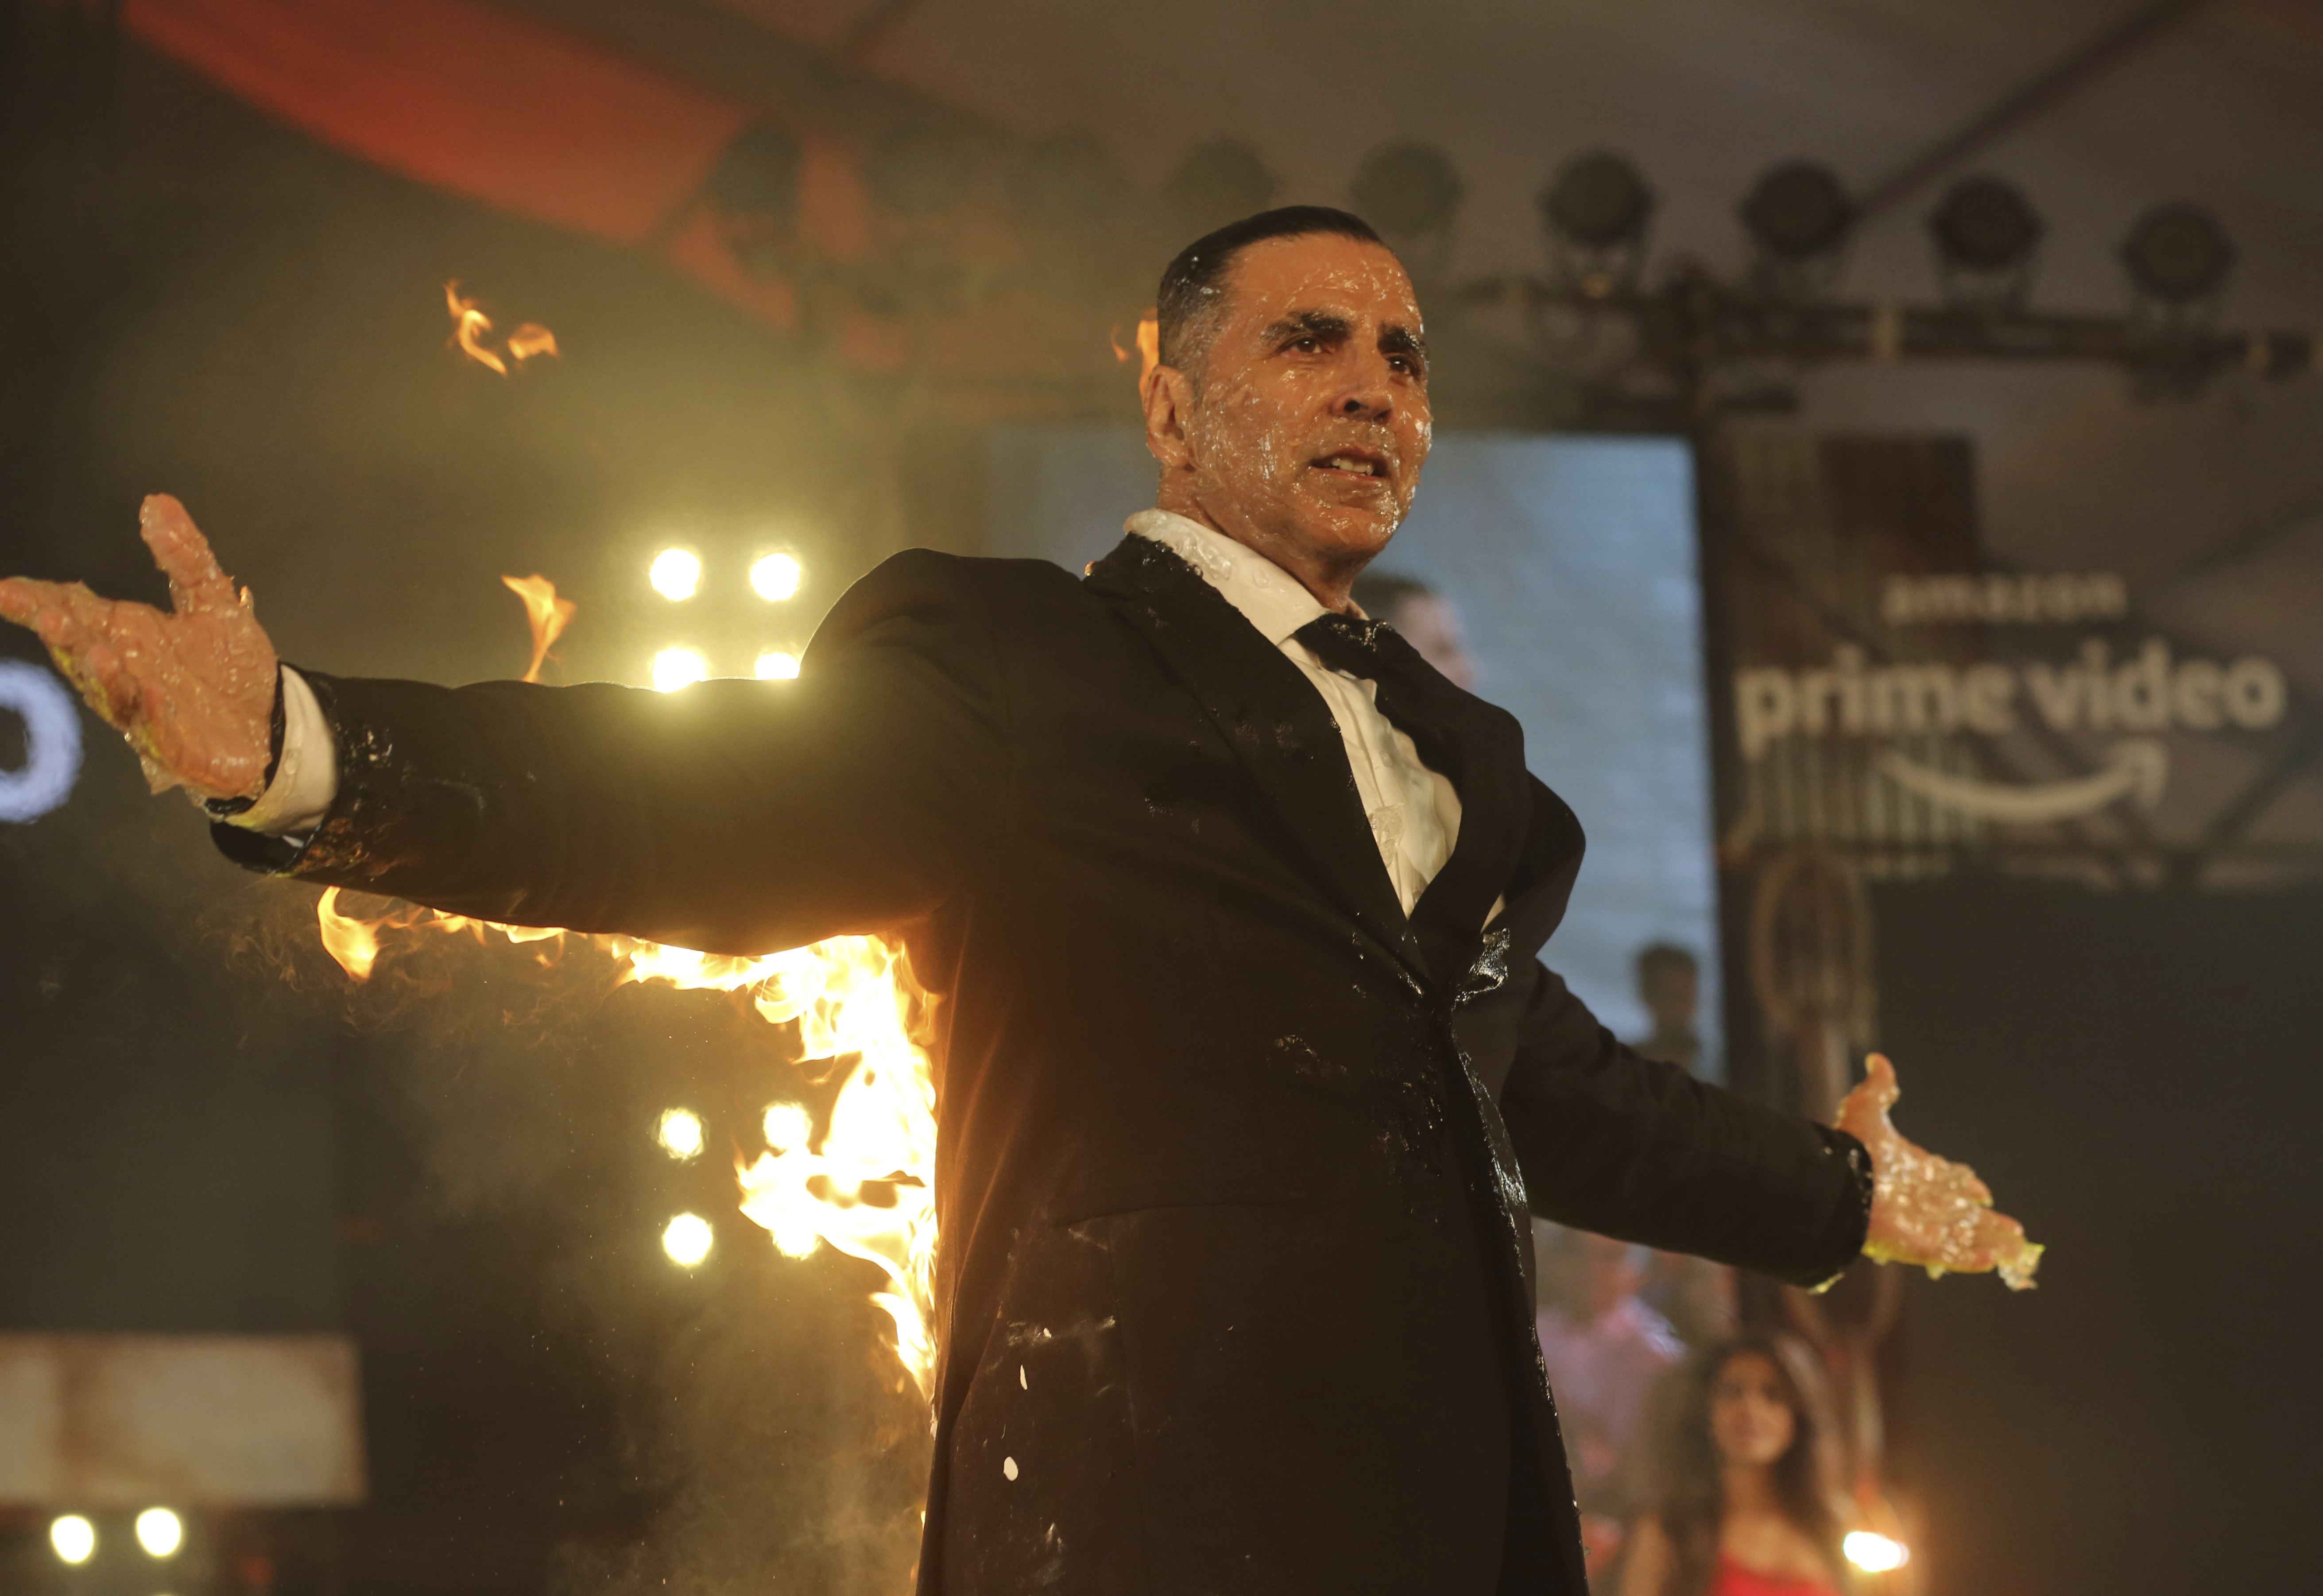 Bollywood actor Akshay Kumar performs a stunt during an event to mark his digital debut with an Amazon Prime Video series in Mumbai - AP